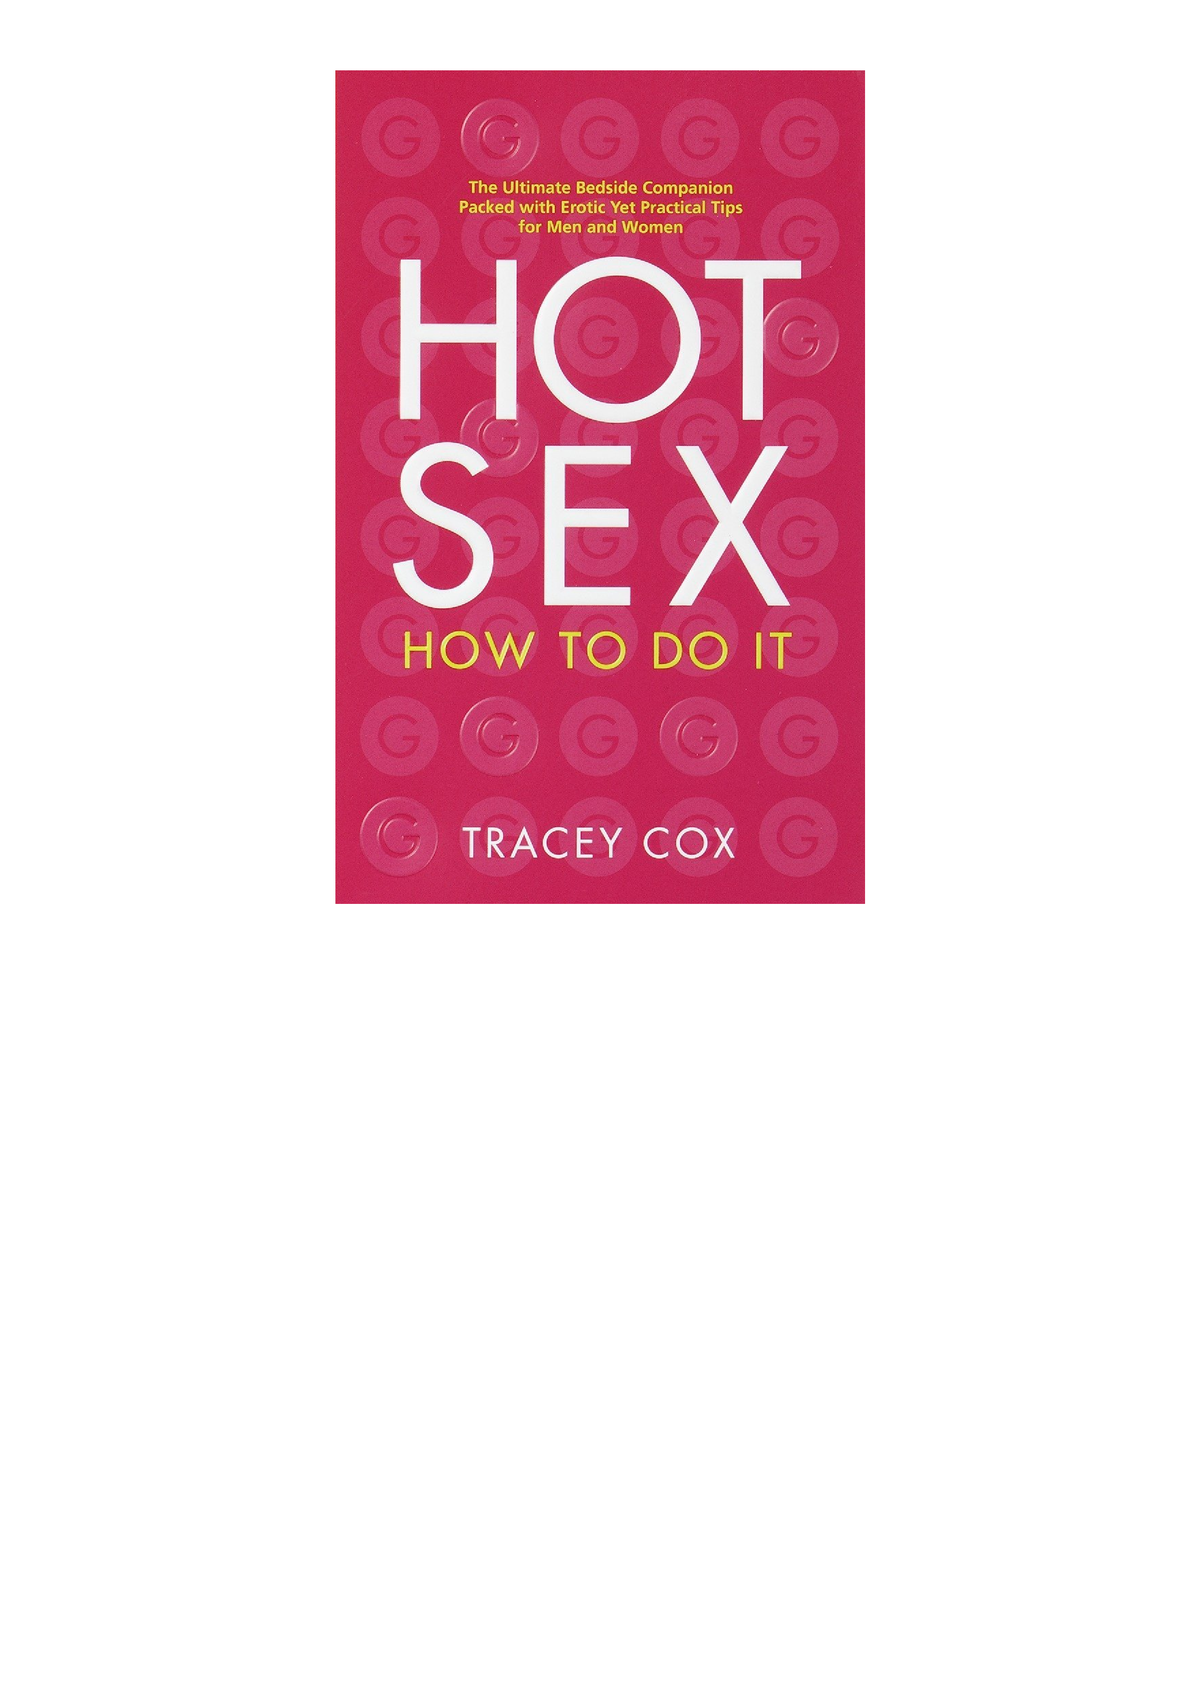 Ebook Hot Sex How To Do It Download Hot Sex How To Do It Description The Ultimate Bedside